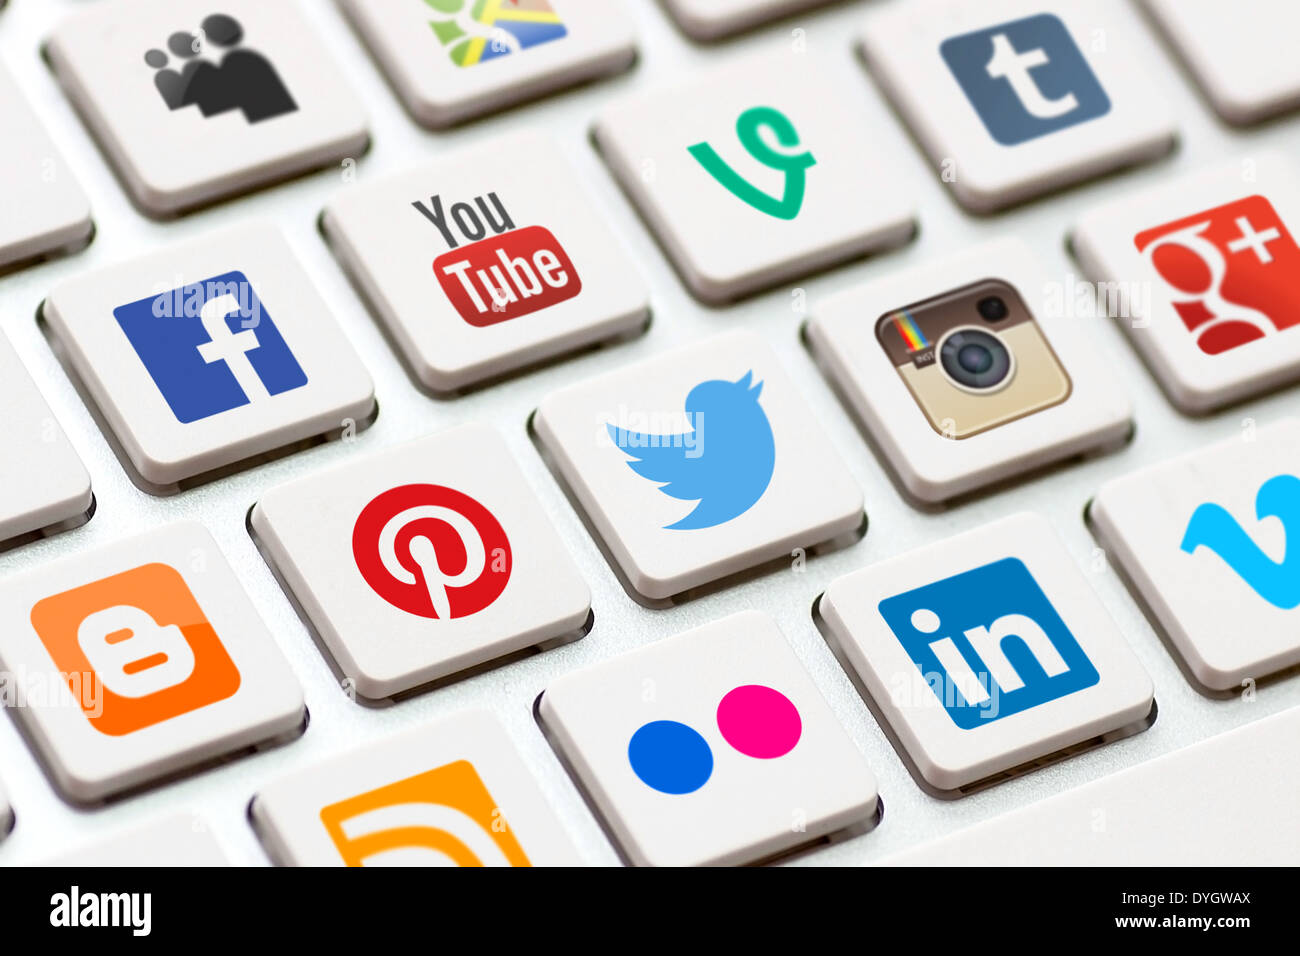 BELCHATOW, POLAND - MAY 02, 2013: Modern white keyboard with colored social network buttons. Stock Photo